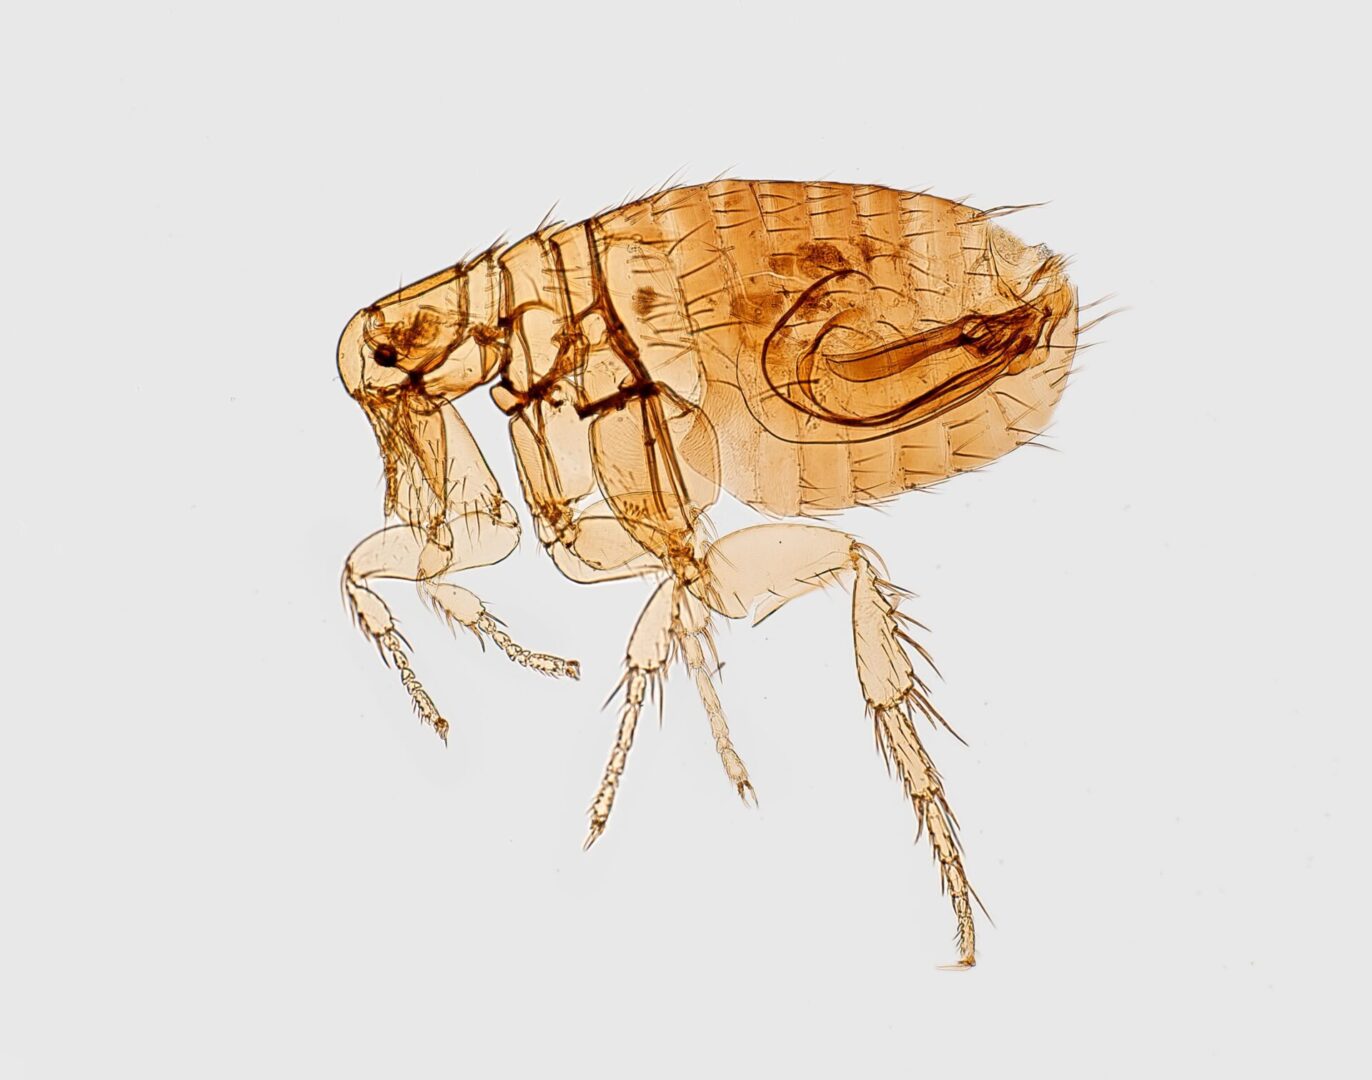 A close up of a flea on a white background